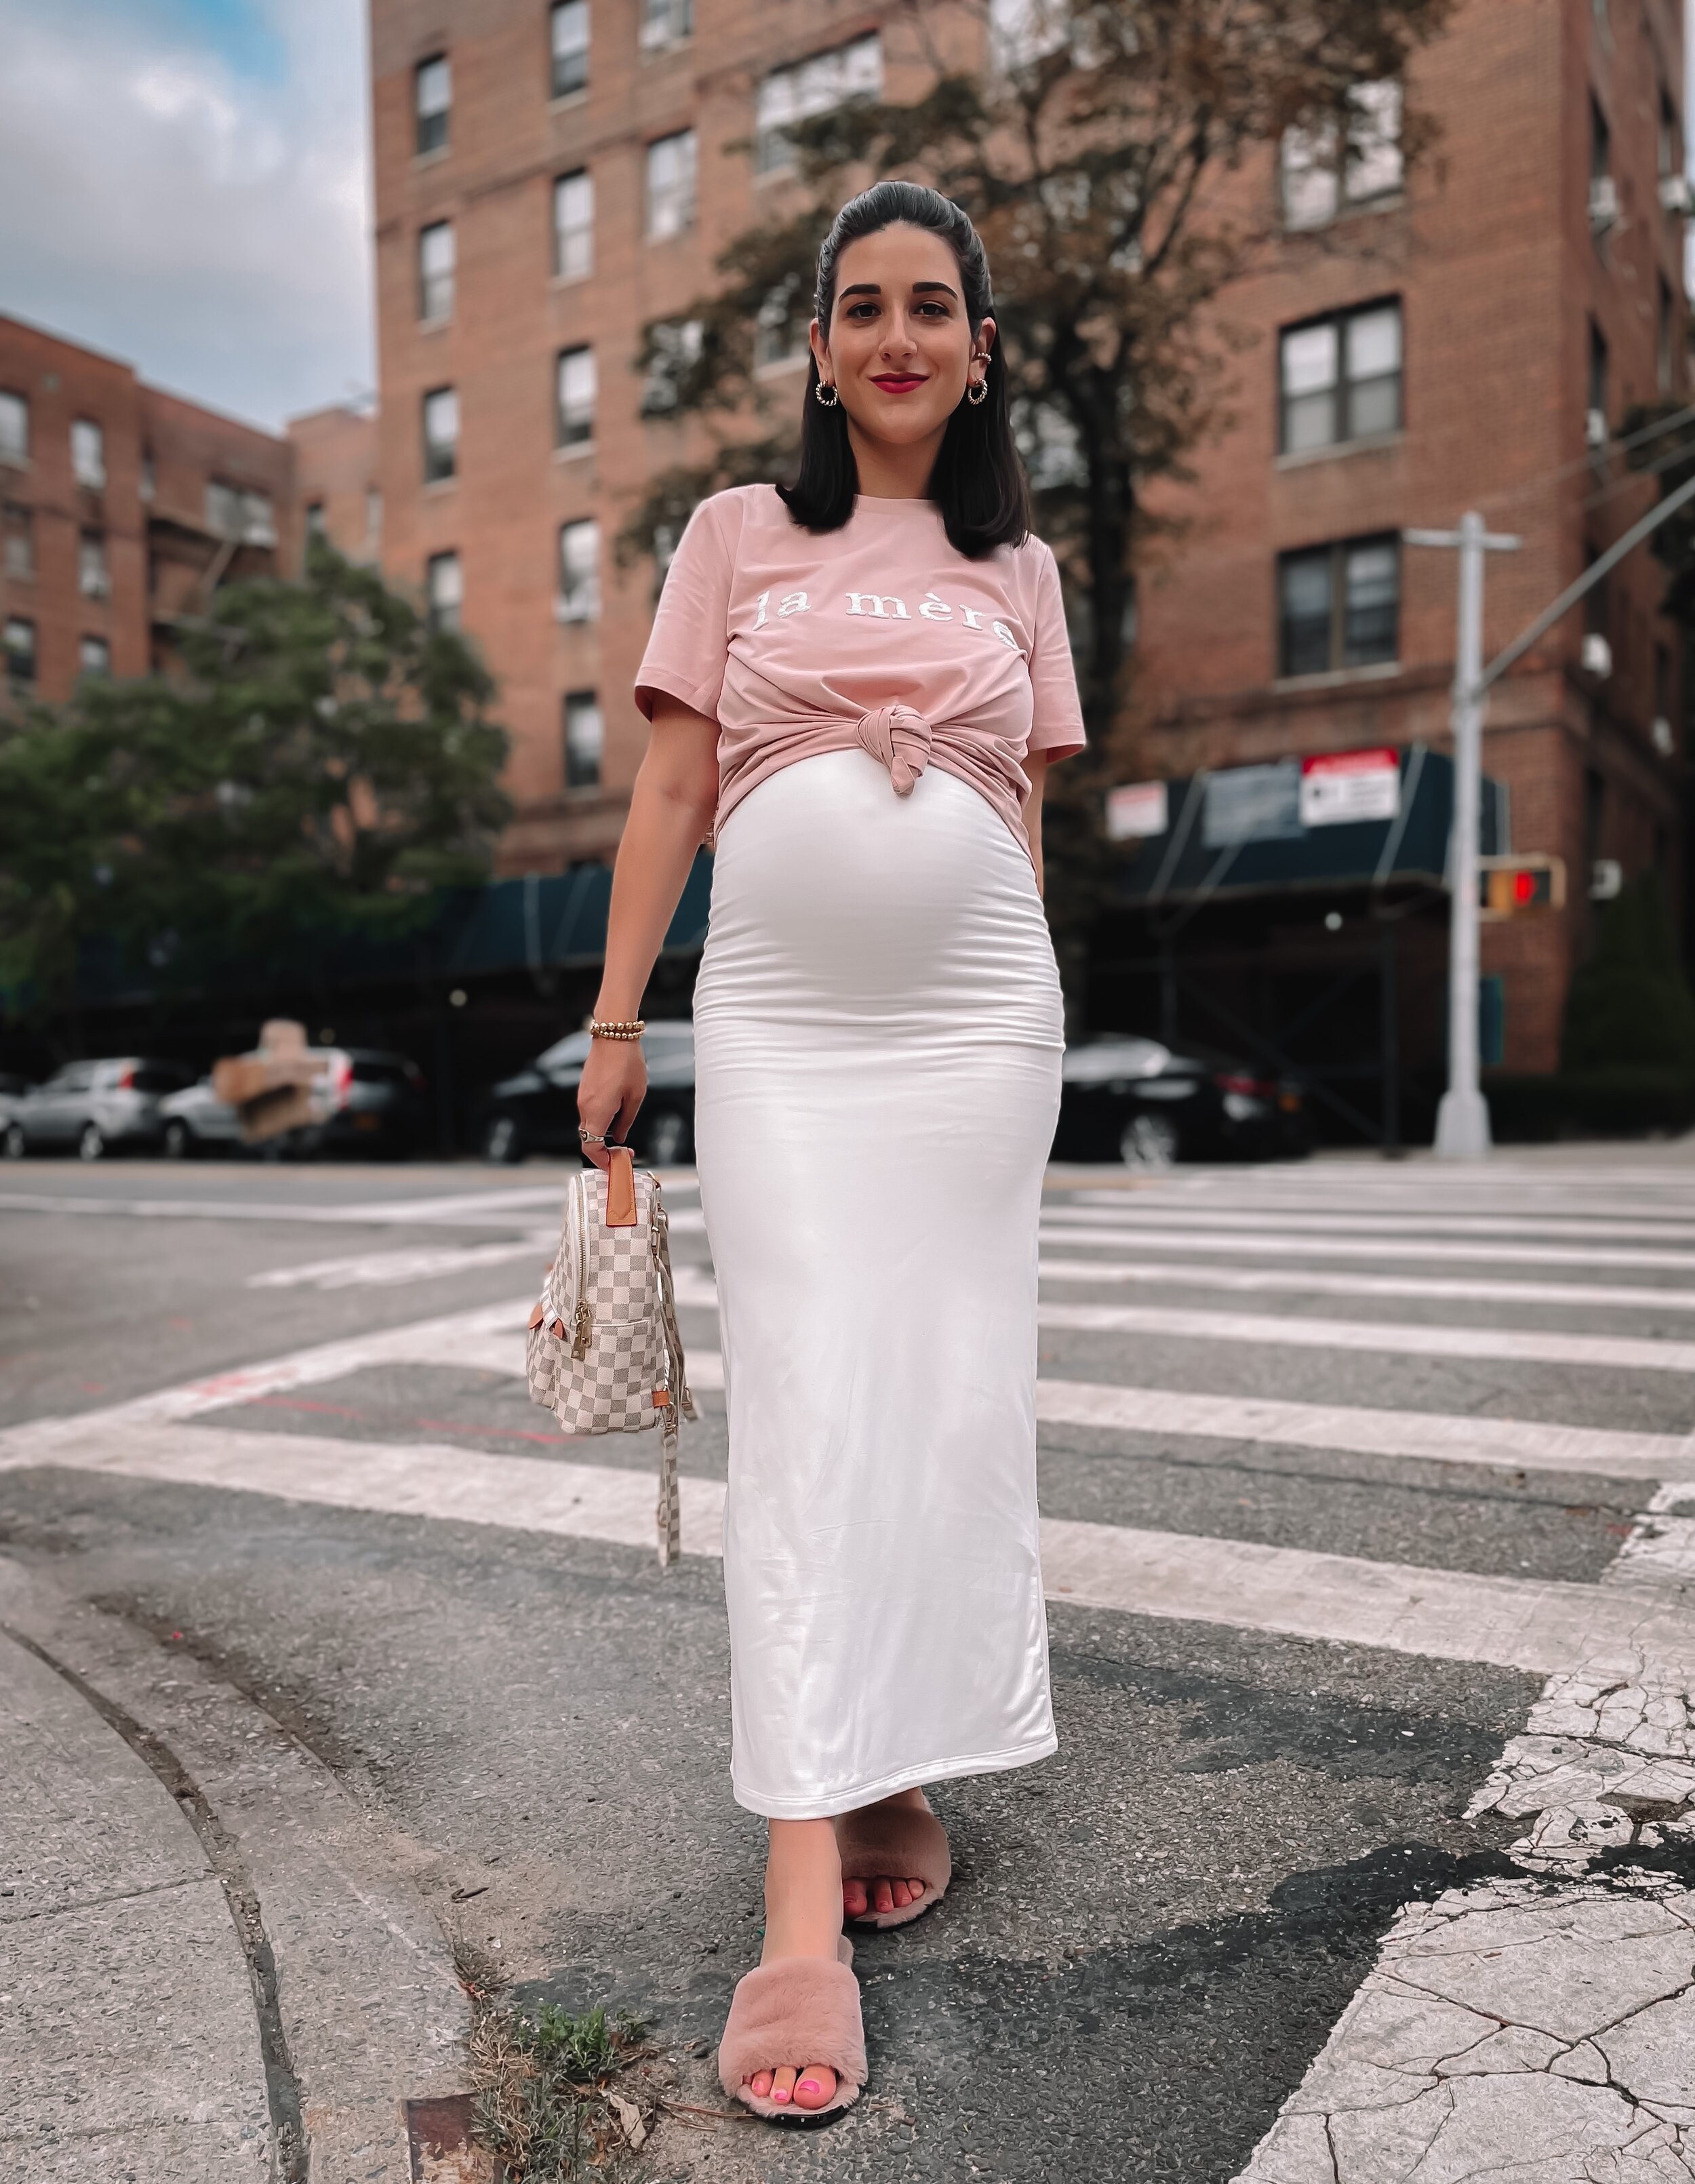 White Bumpsuit Dress Pink 'La Mère' Tee 33 Week Update Esther Santer NYC Street Style Blogger Pregnancy Bump Style Friendly Maternity Fashion Bae the Label Kenneth Cole Fur Slides Goodnight Macaroon Backpack Cute Outfit Buy Shop Expecting Mom  OOTD.JPG